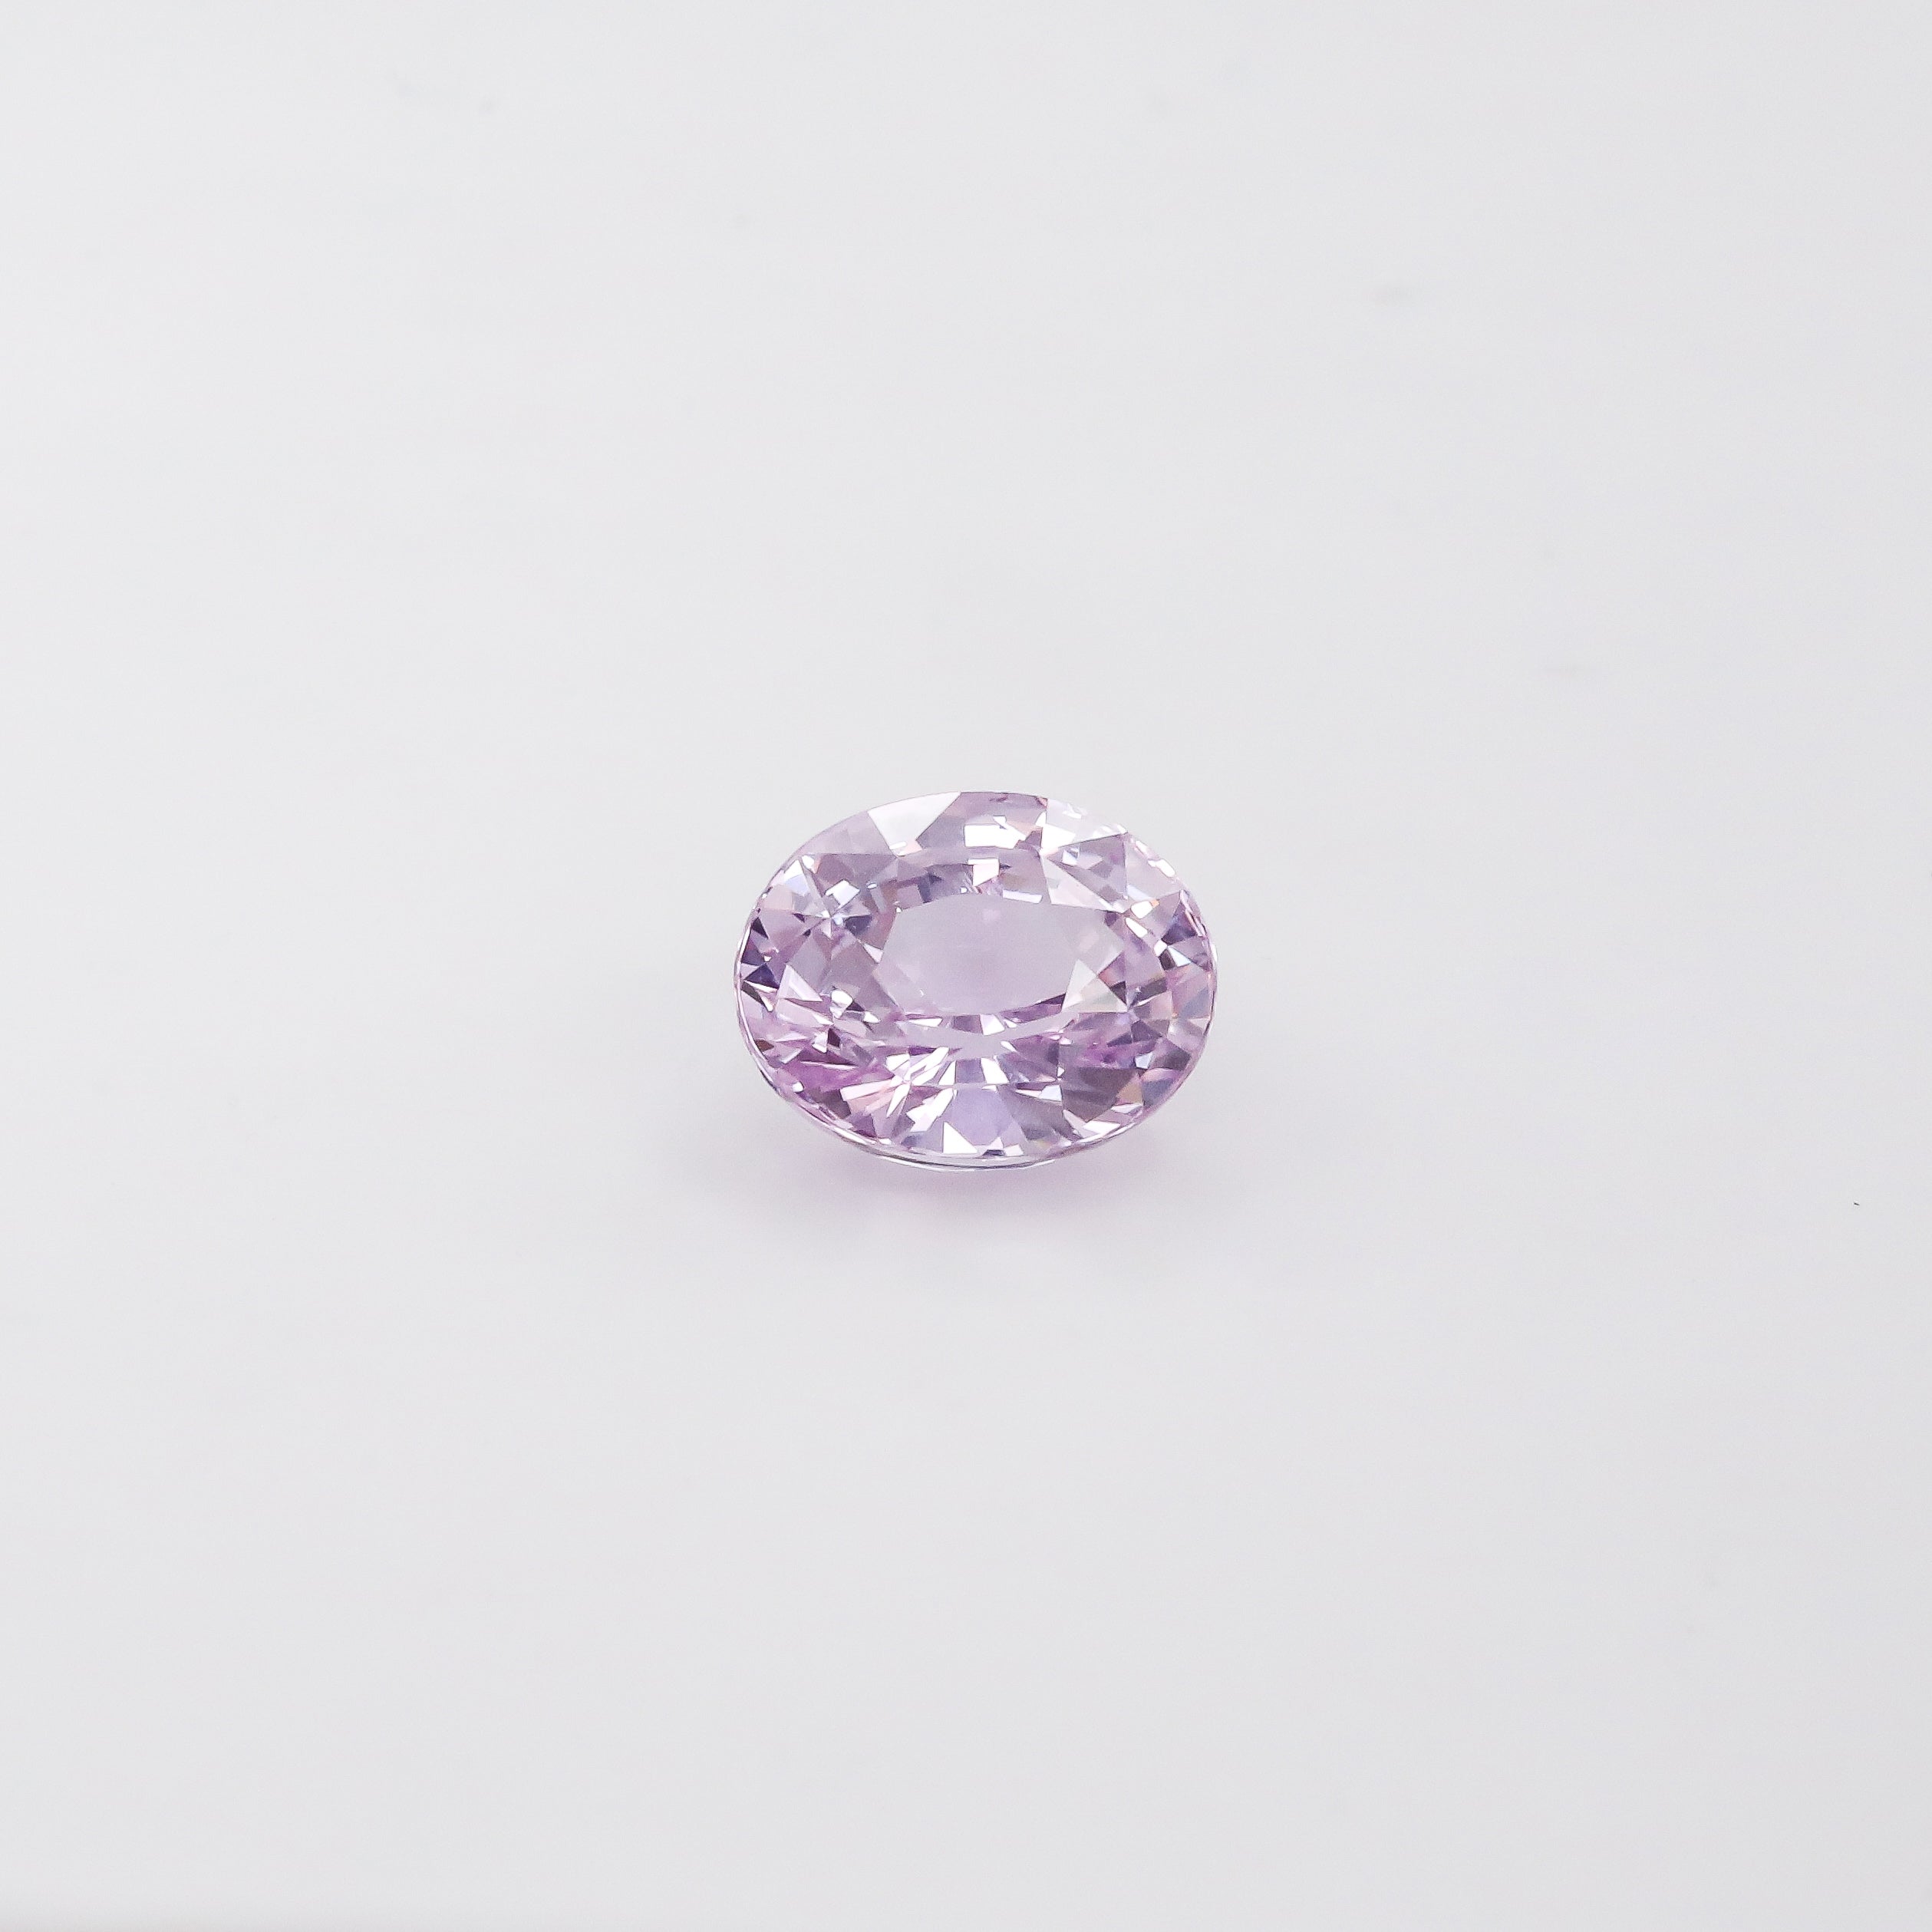 Pink Oval Cut Sapphire 2.81ct